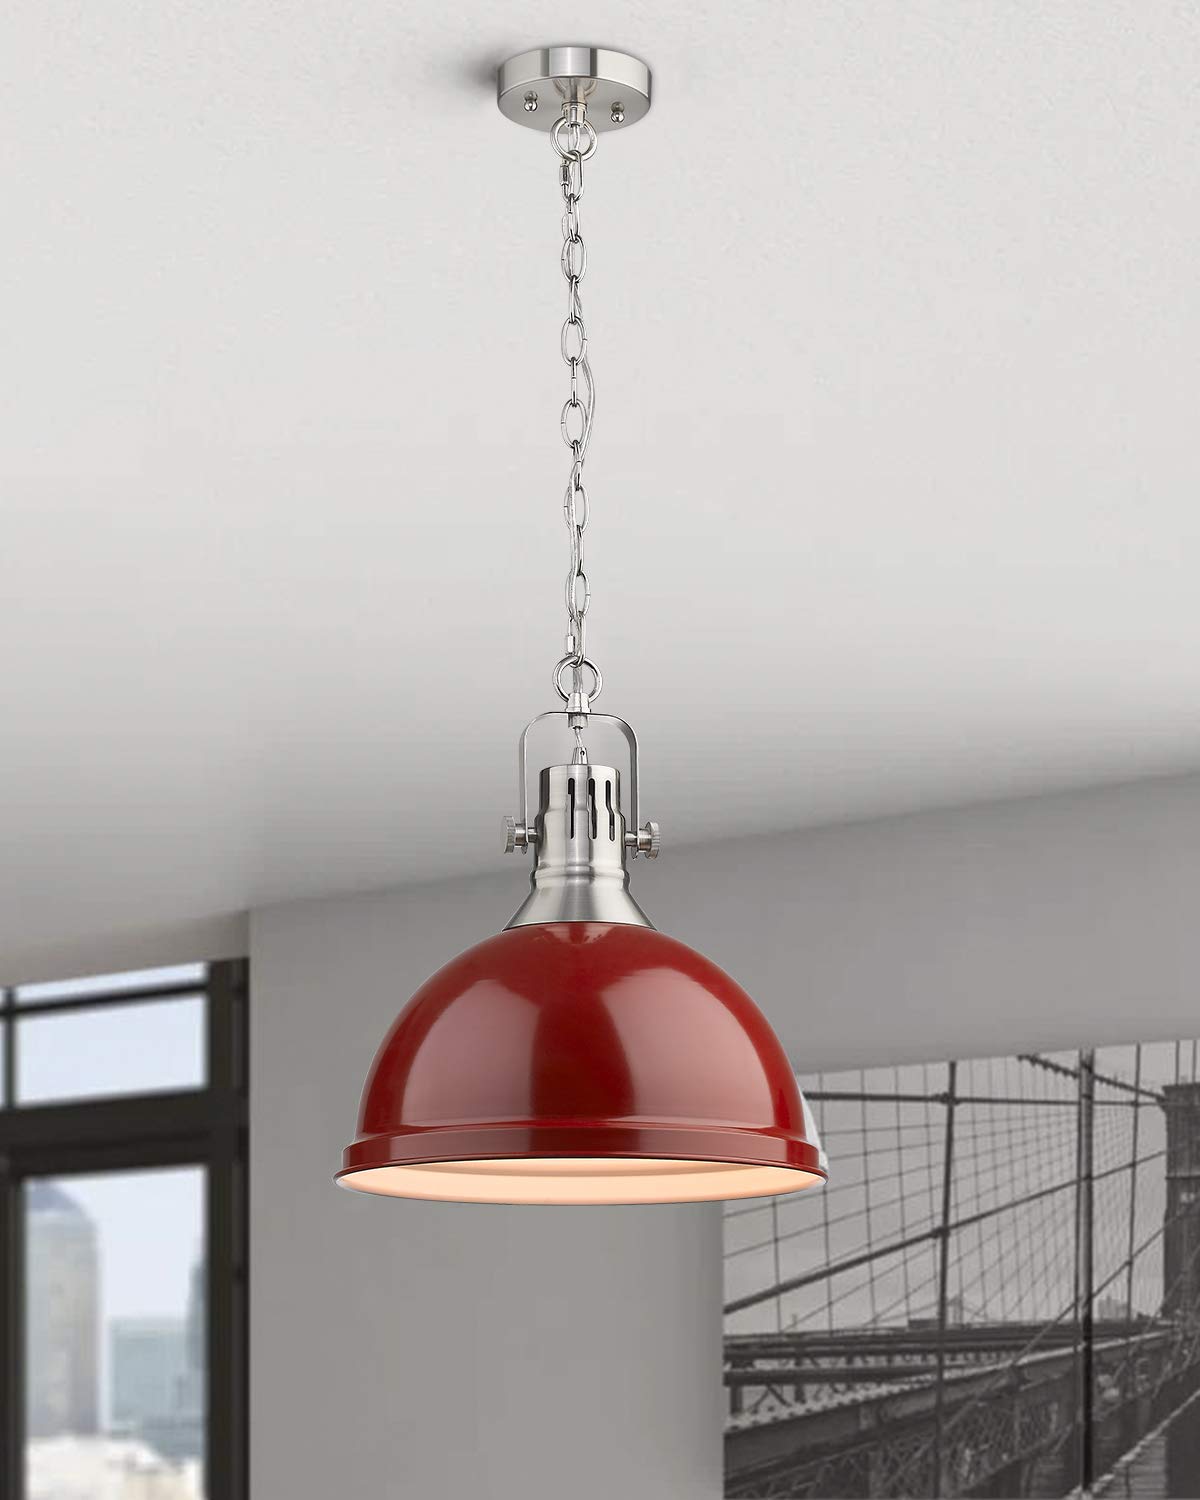 
                  
                    Emliviar Dome Pendant Light 14 inch, Hanging Light Fixture with Metal Shade, Red and Brushed Nickel Finish, 4054L BN/RED
                  
                